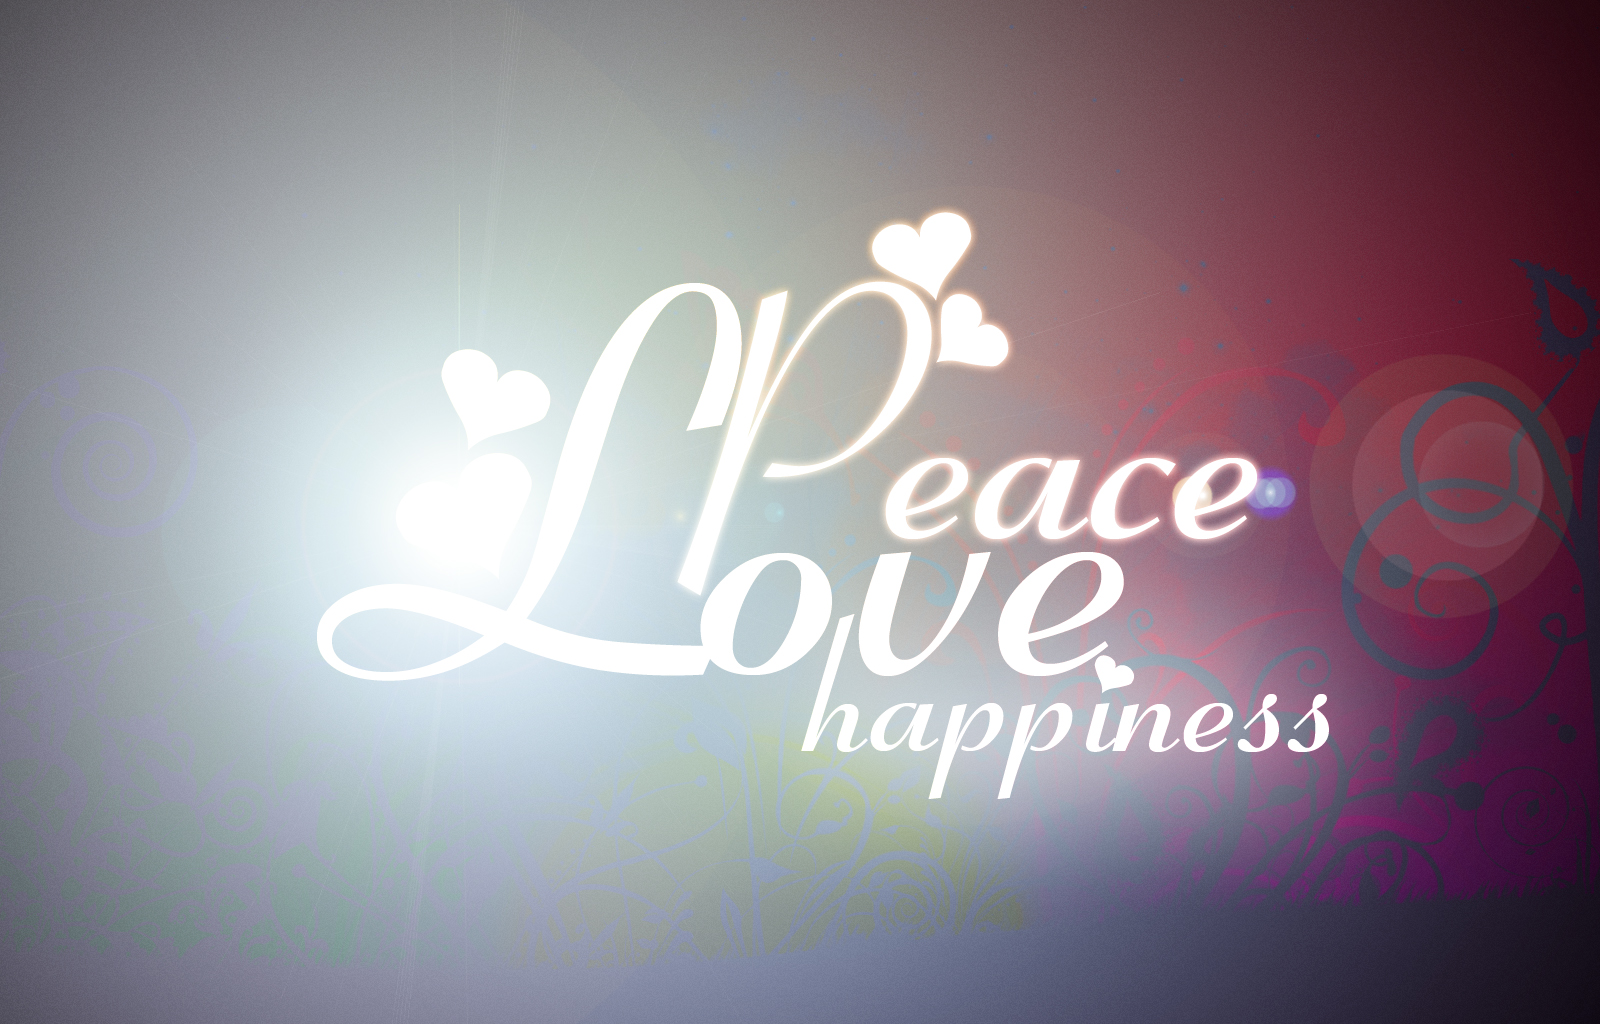 Love Peace Happiness Wallpaper Peace Love Happiness Love Happiness Hd Wallpaper Backgrounds Download